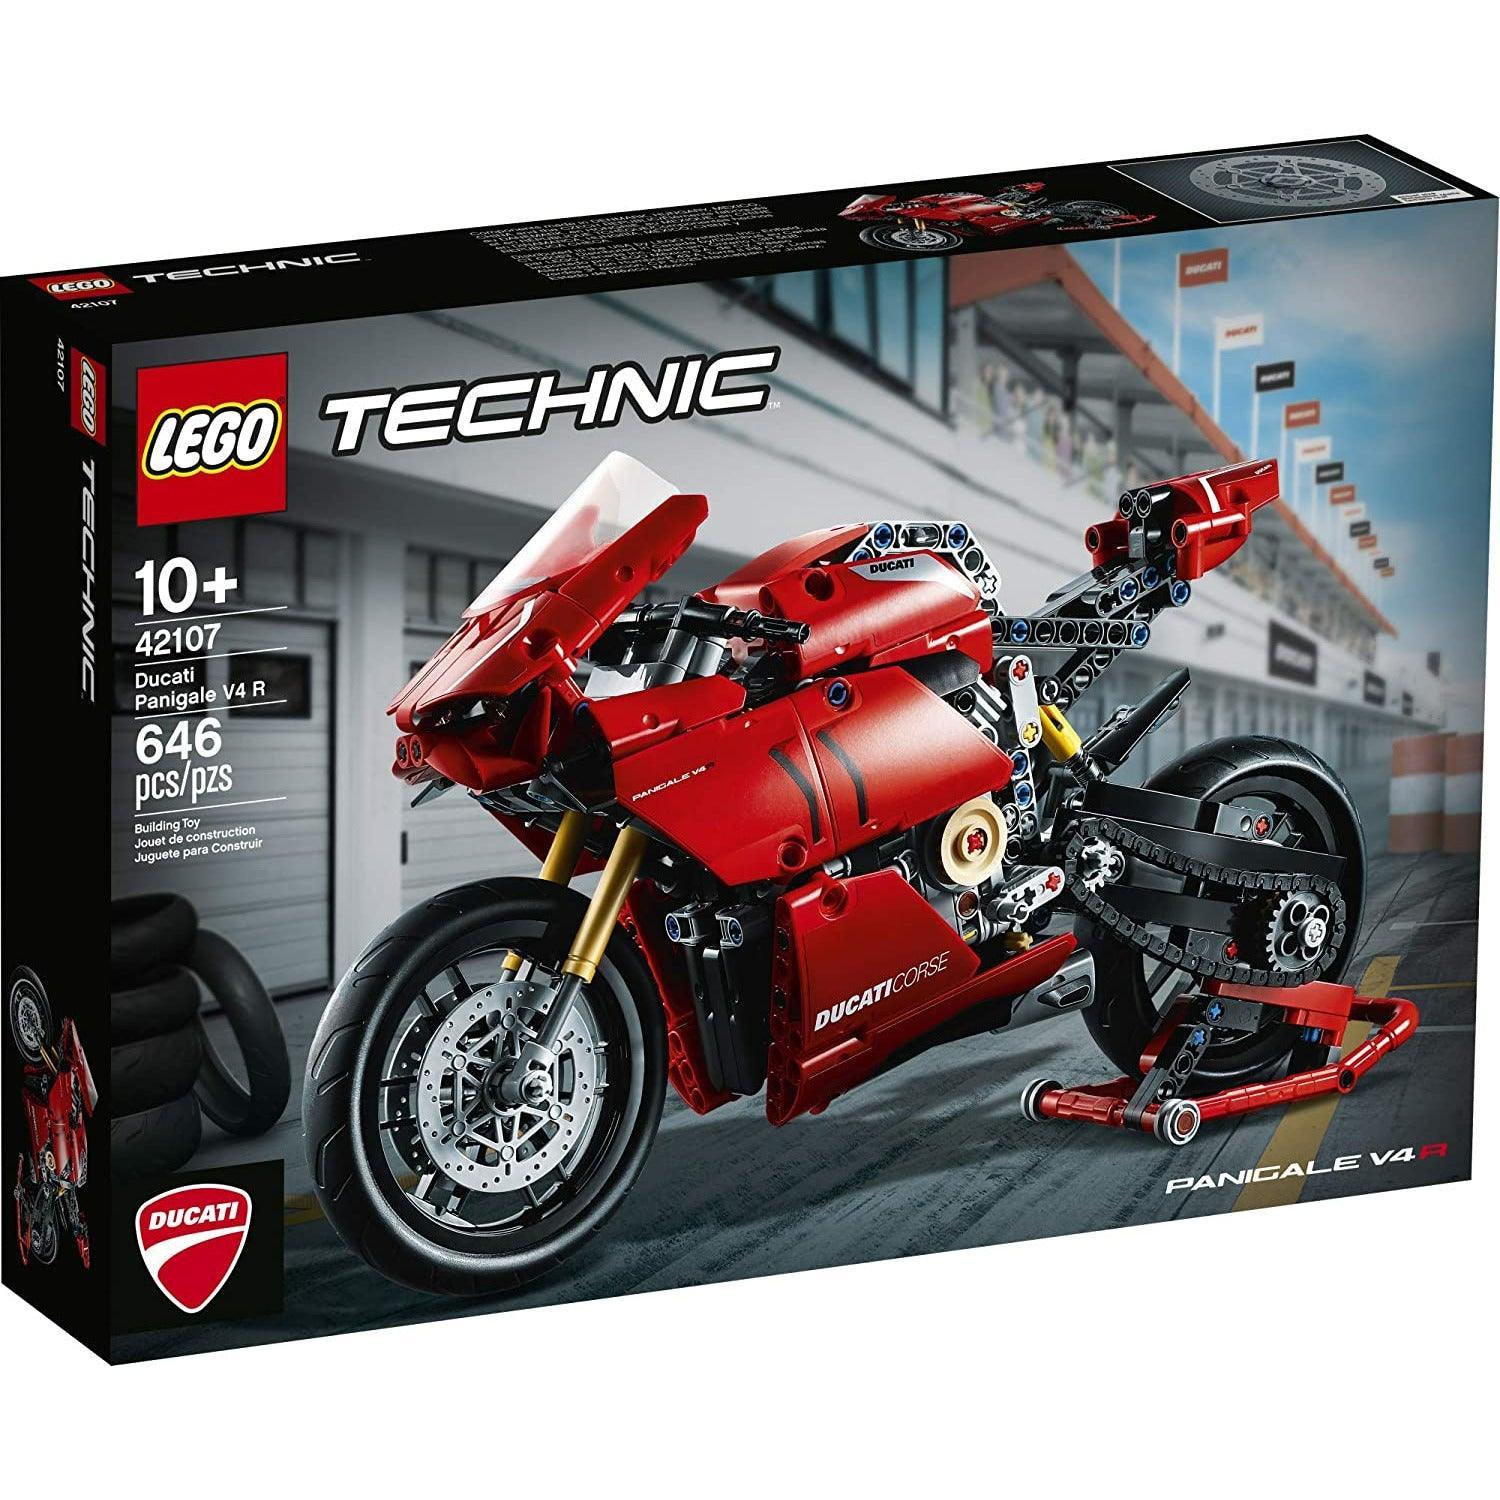 LEGO Technic Ducati Panigale V4 R 42107 Motorcycle Toy Building Kit, Build A Model Motorcycle,  (646 Pieces) - BumbleToys - 8+ Years, Boys, LEGO, OXE, Pre-Order, Technic